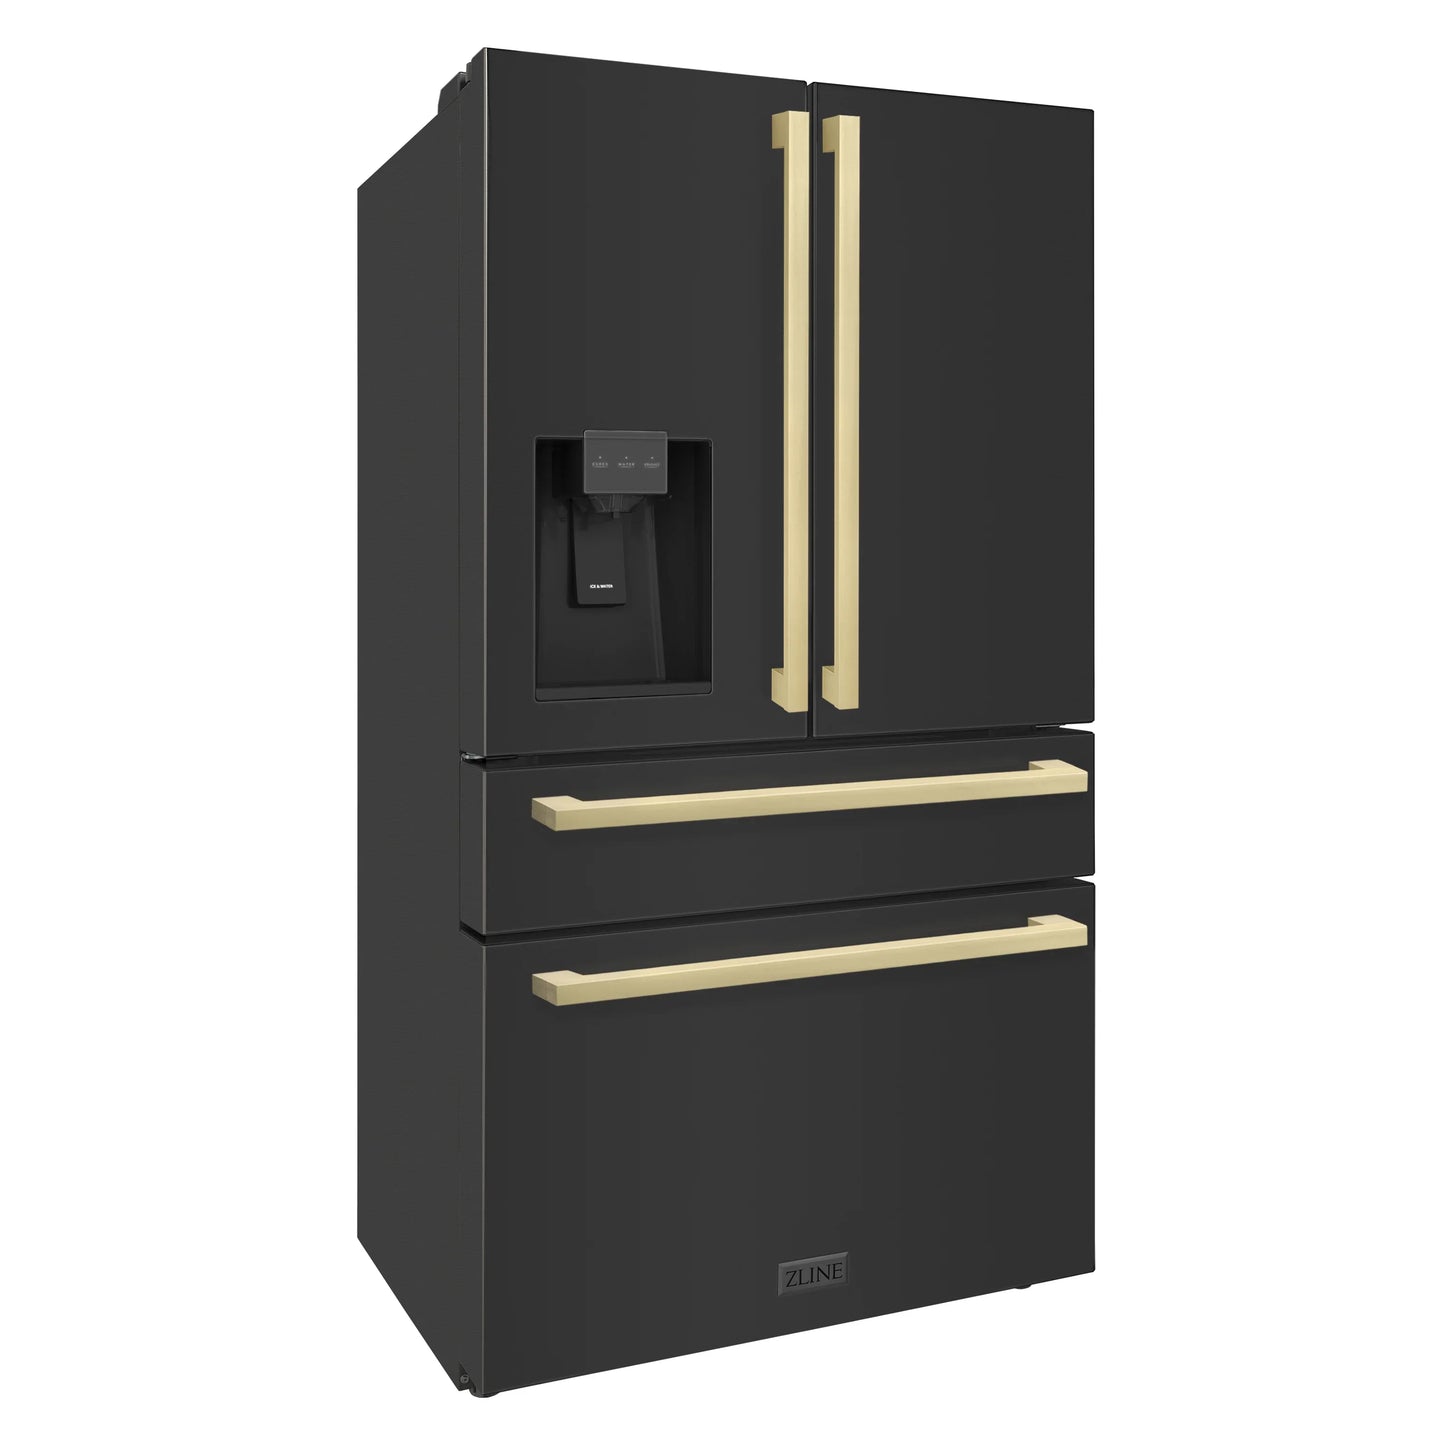 ZLINE 36" Autograph Refrigerator with Water and Ice Dispenser in Black with Champagne Bronze Square Handles, RFMZ-W36-BS-FCB